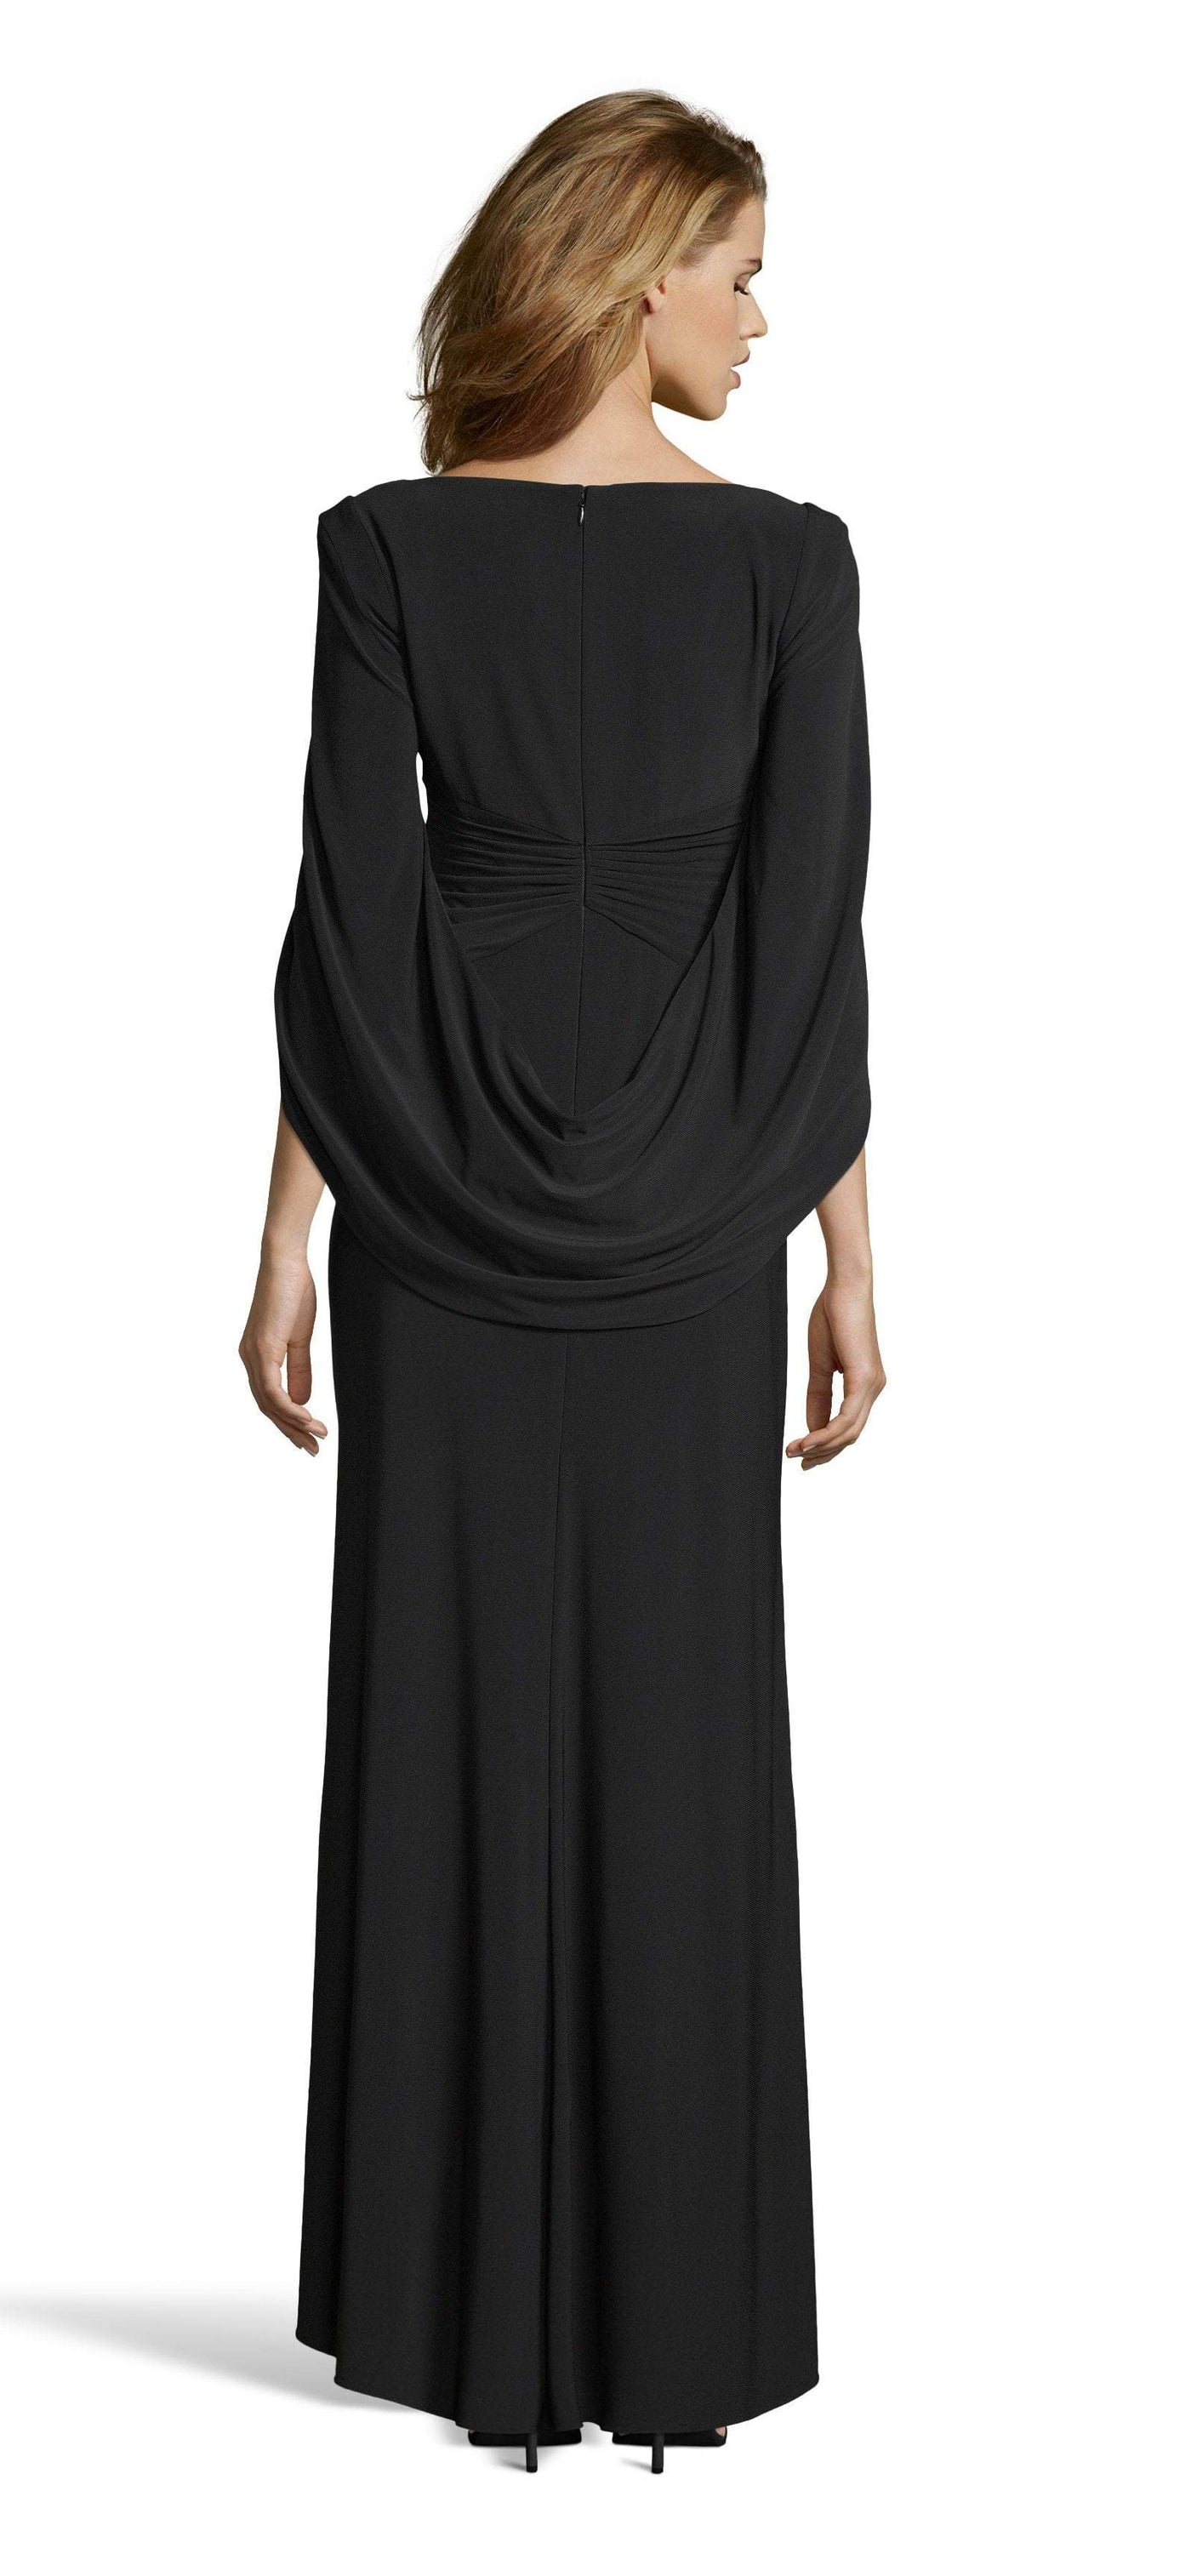 Adrianna Papell - AP1E204664 Knotted V-Neck Capelet Dress In Black